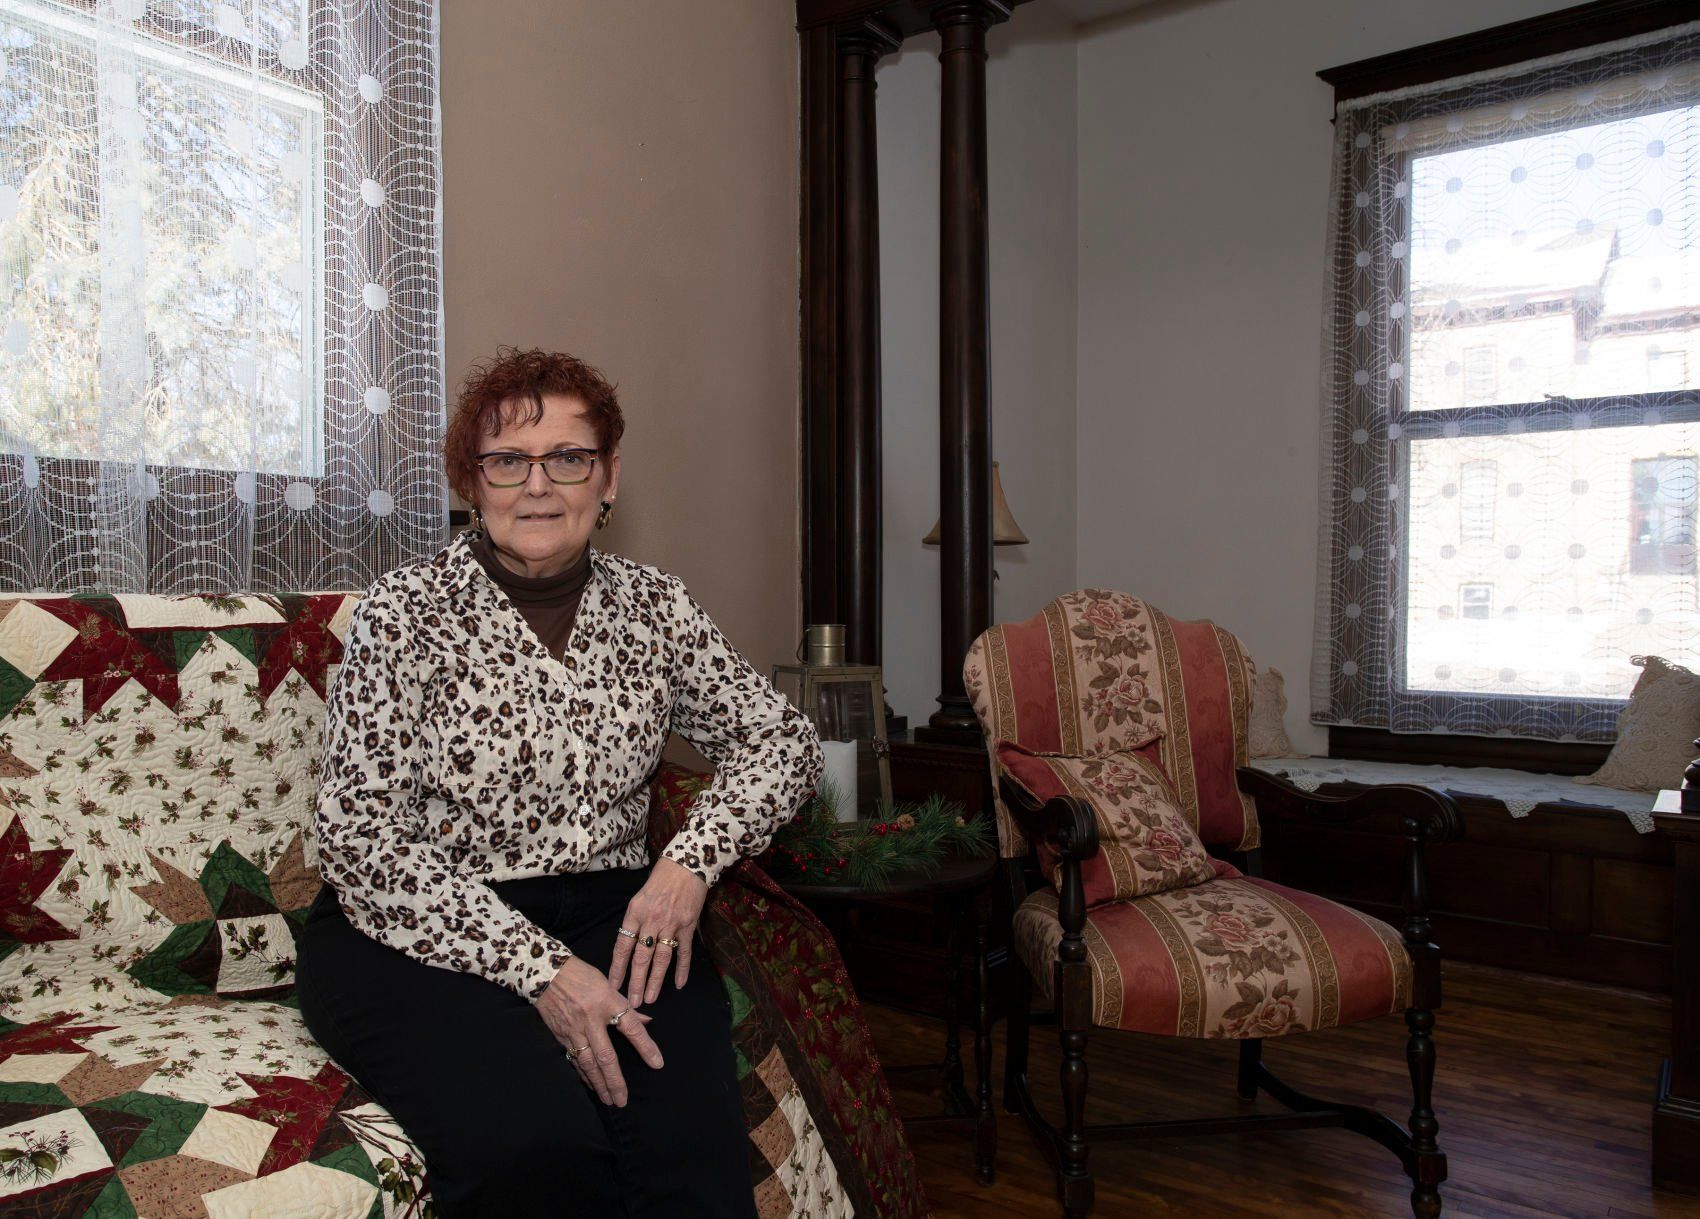 Owner Carol Long sits inside the historic DeWitt House which she plans to rent out as "A Stitch in Time" retreat locale in Platteville, Wis., on Friday, Jan., 28, 2022.    PHOTO CREDIT: Stephen Gassman